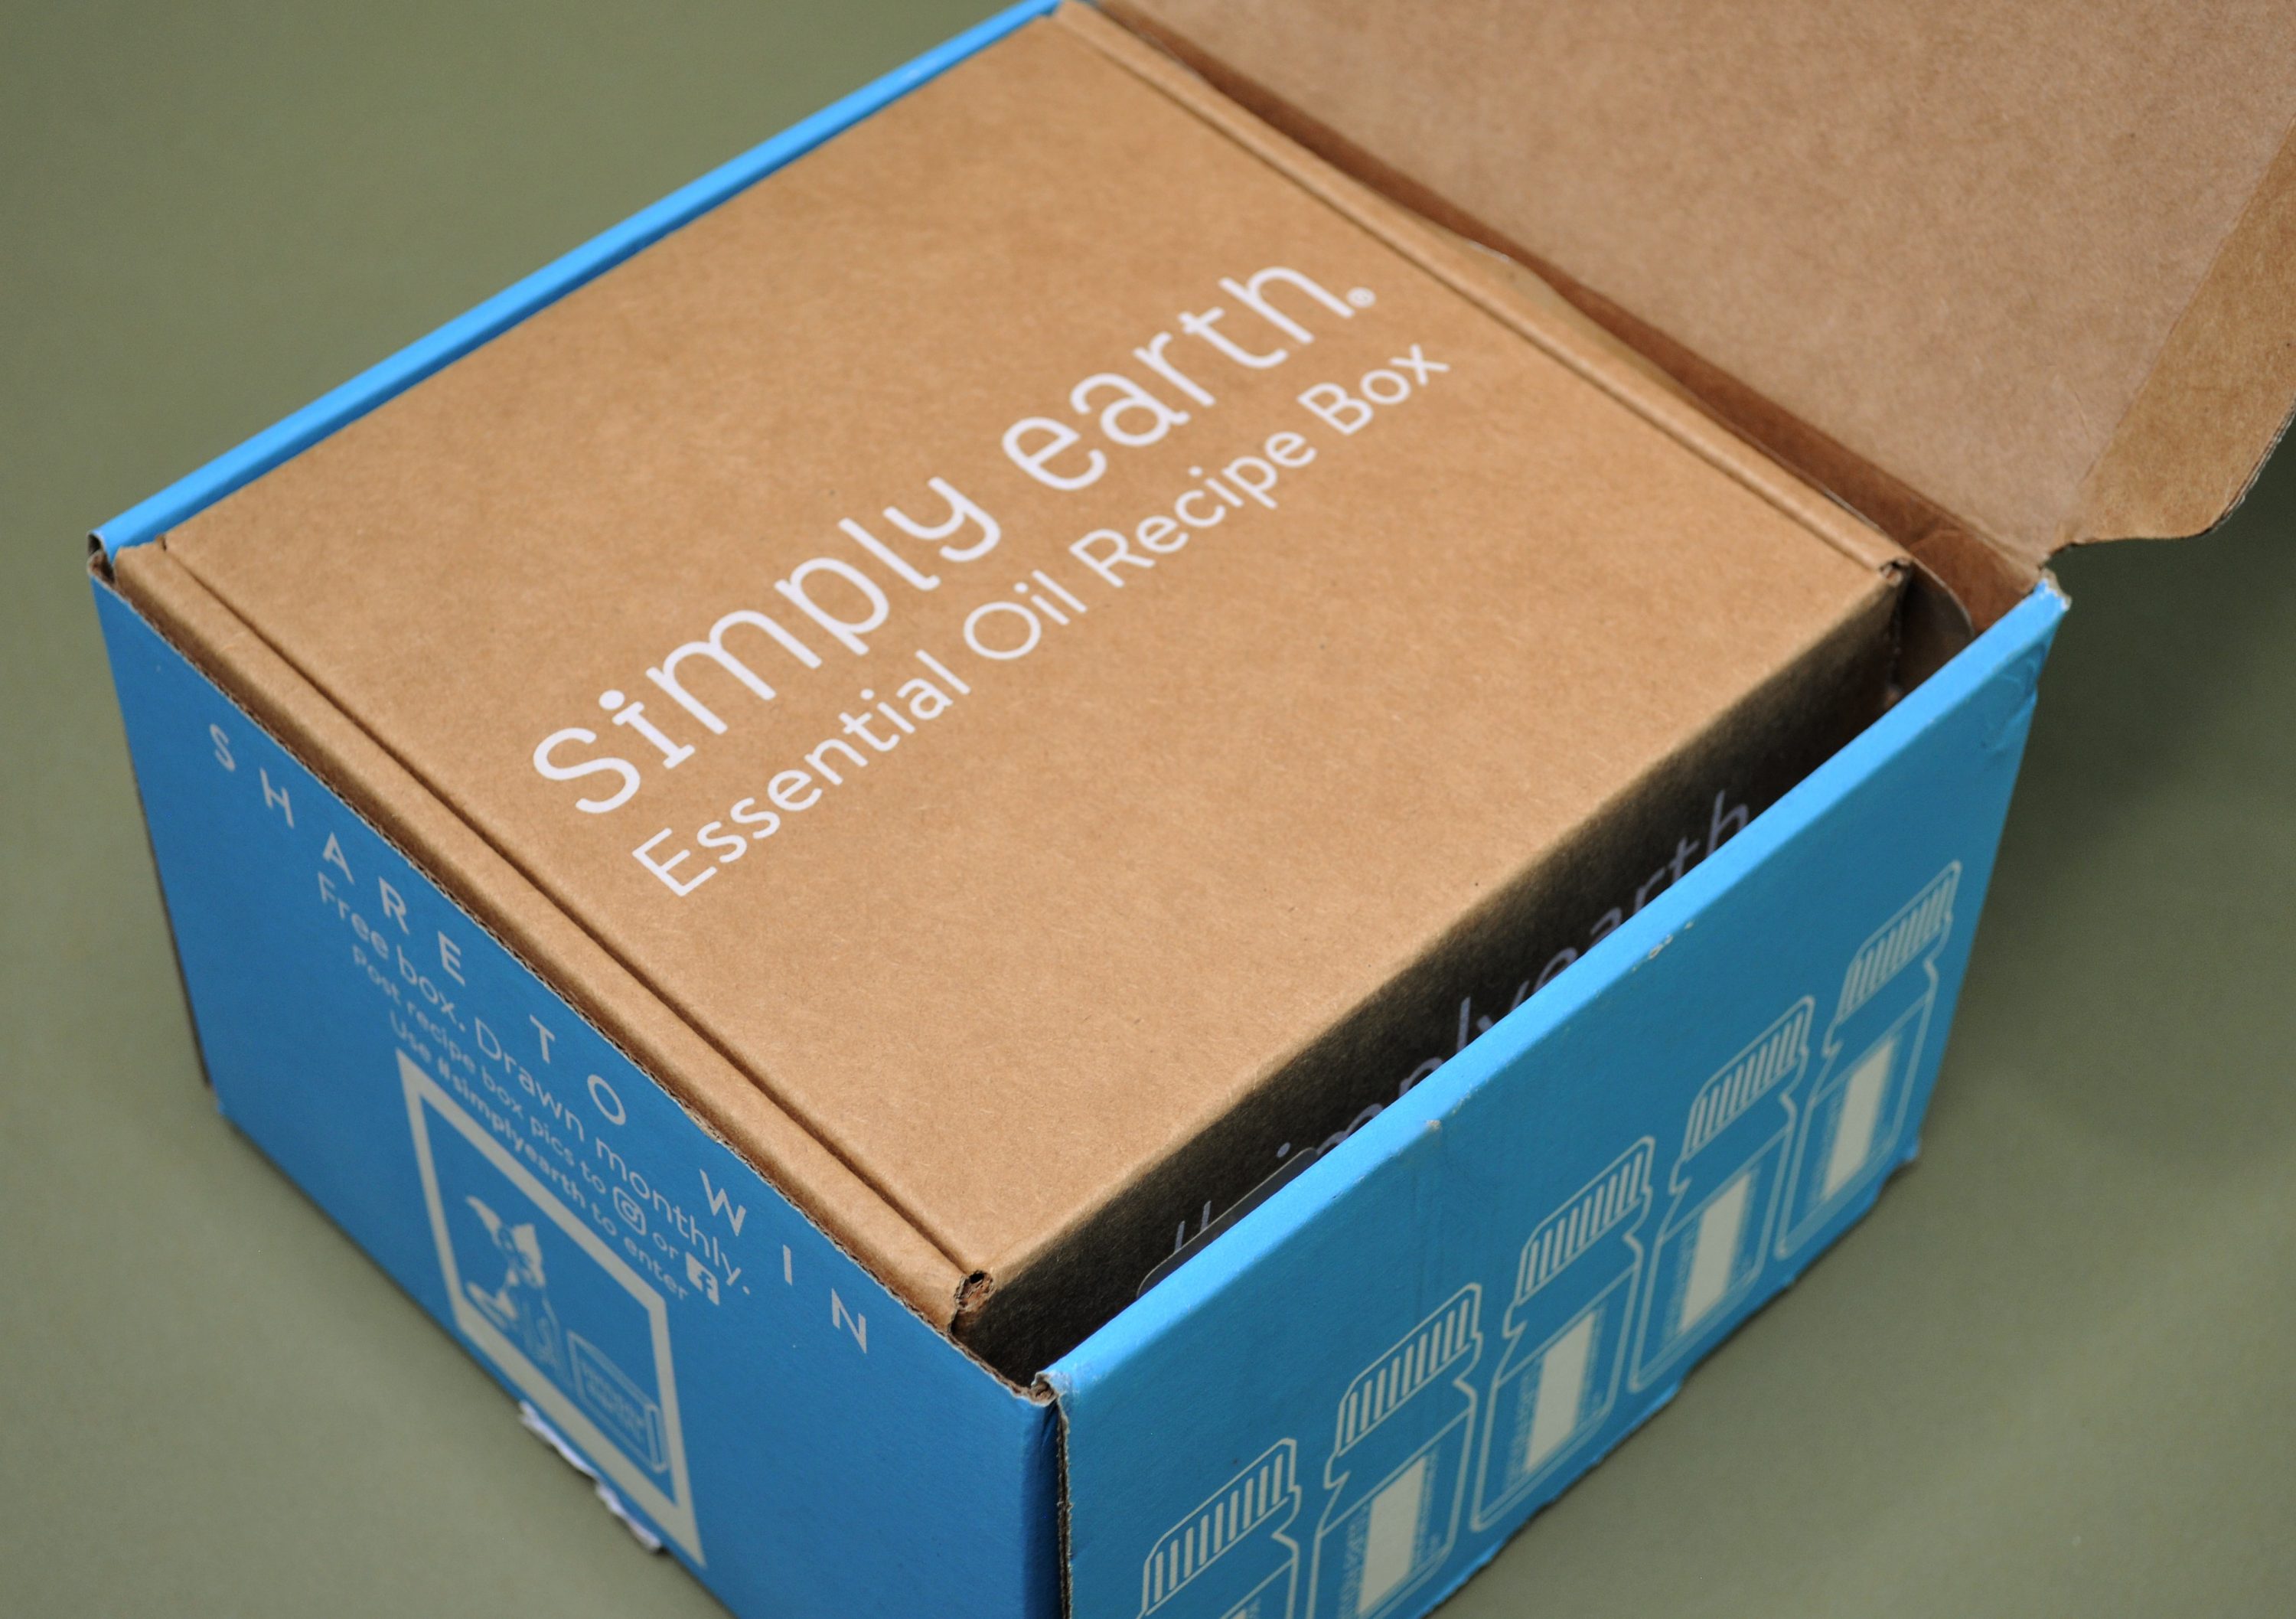 Simply Earth Box Review October 2019